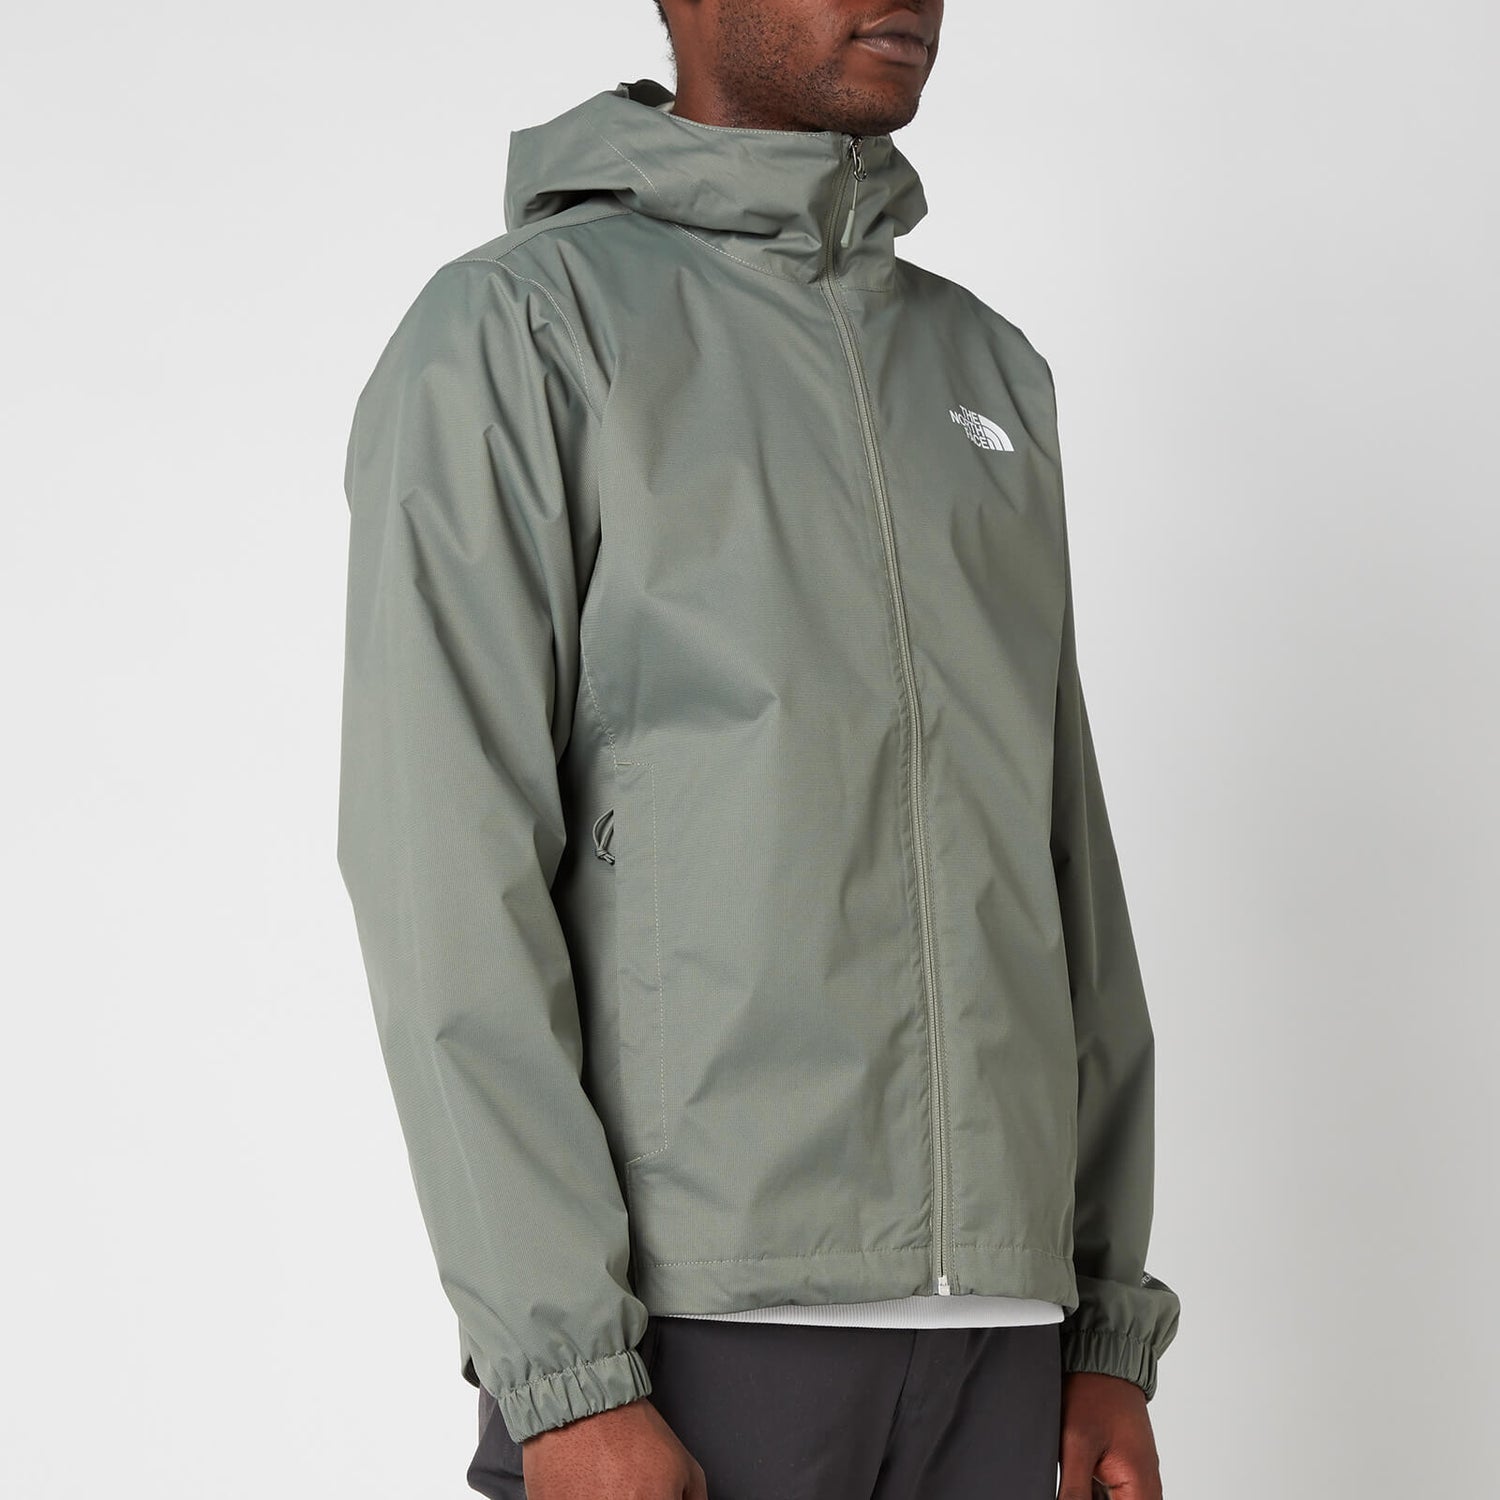 The North Face Men's Quest Jacket - Agave Green/Black Heather